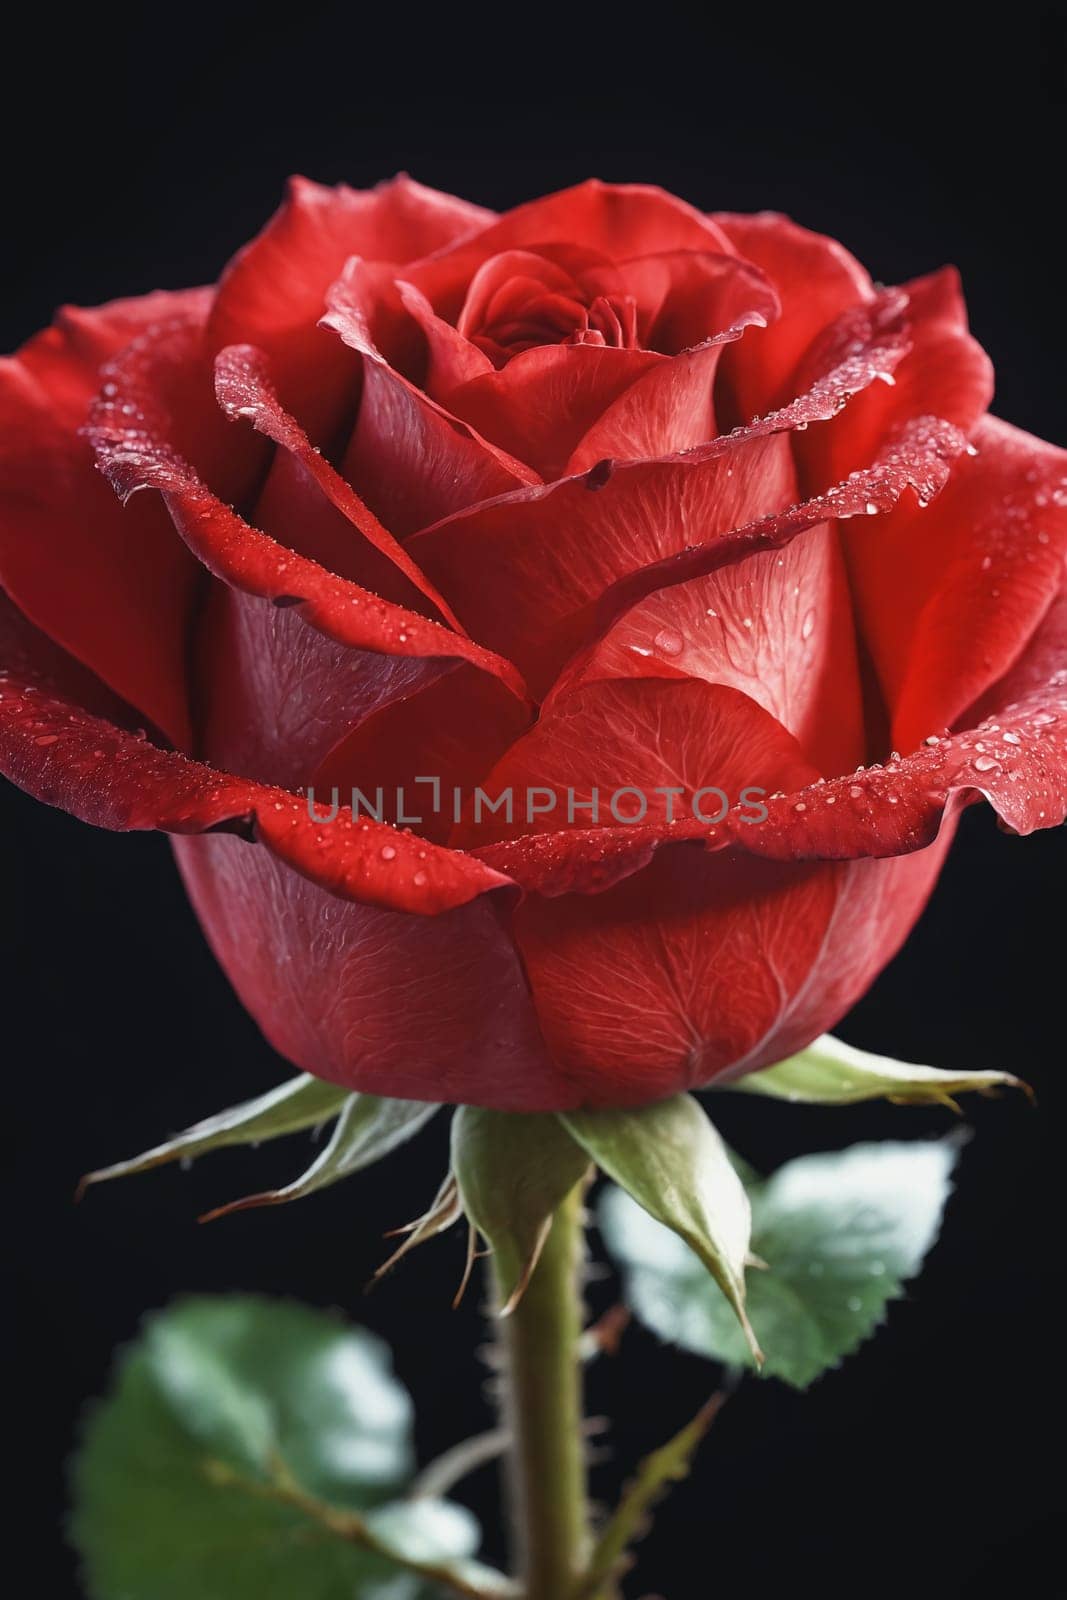 This stunning close-up features a vibrant red rose adorned with droplets, encapsulating a sense of freshness and passion. A great fit for floral research, educational content or enchanting visual storytelling.